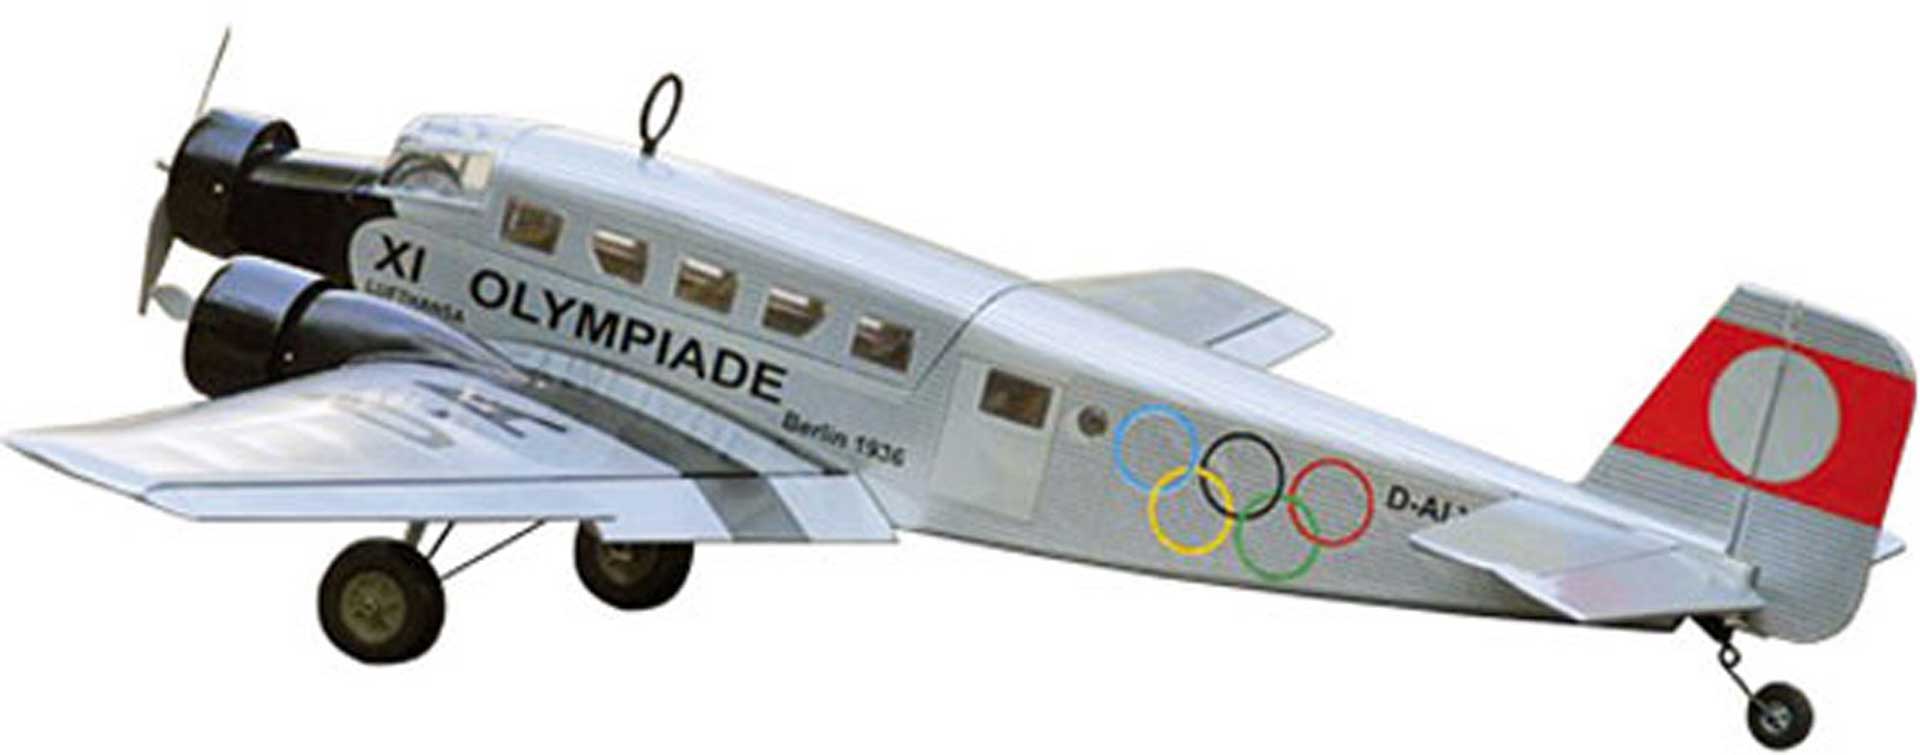 VQ Models JUNKERS JU 52 "OLYMPIA" ARF IN HOLZBAUWEISE